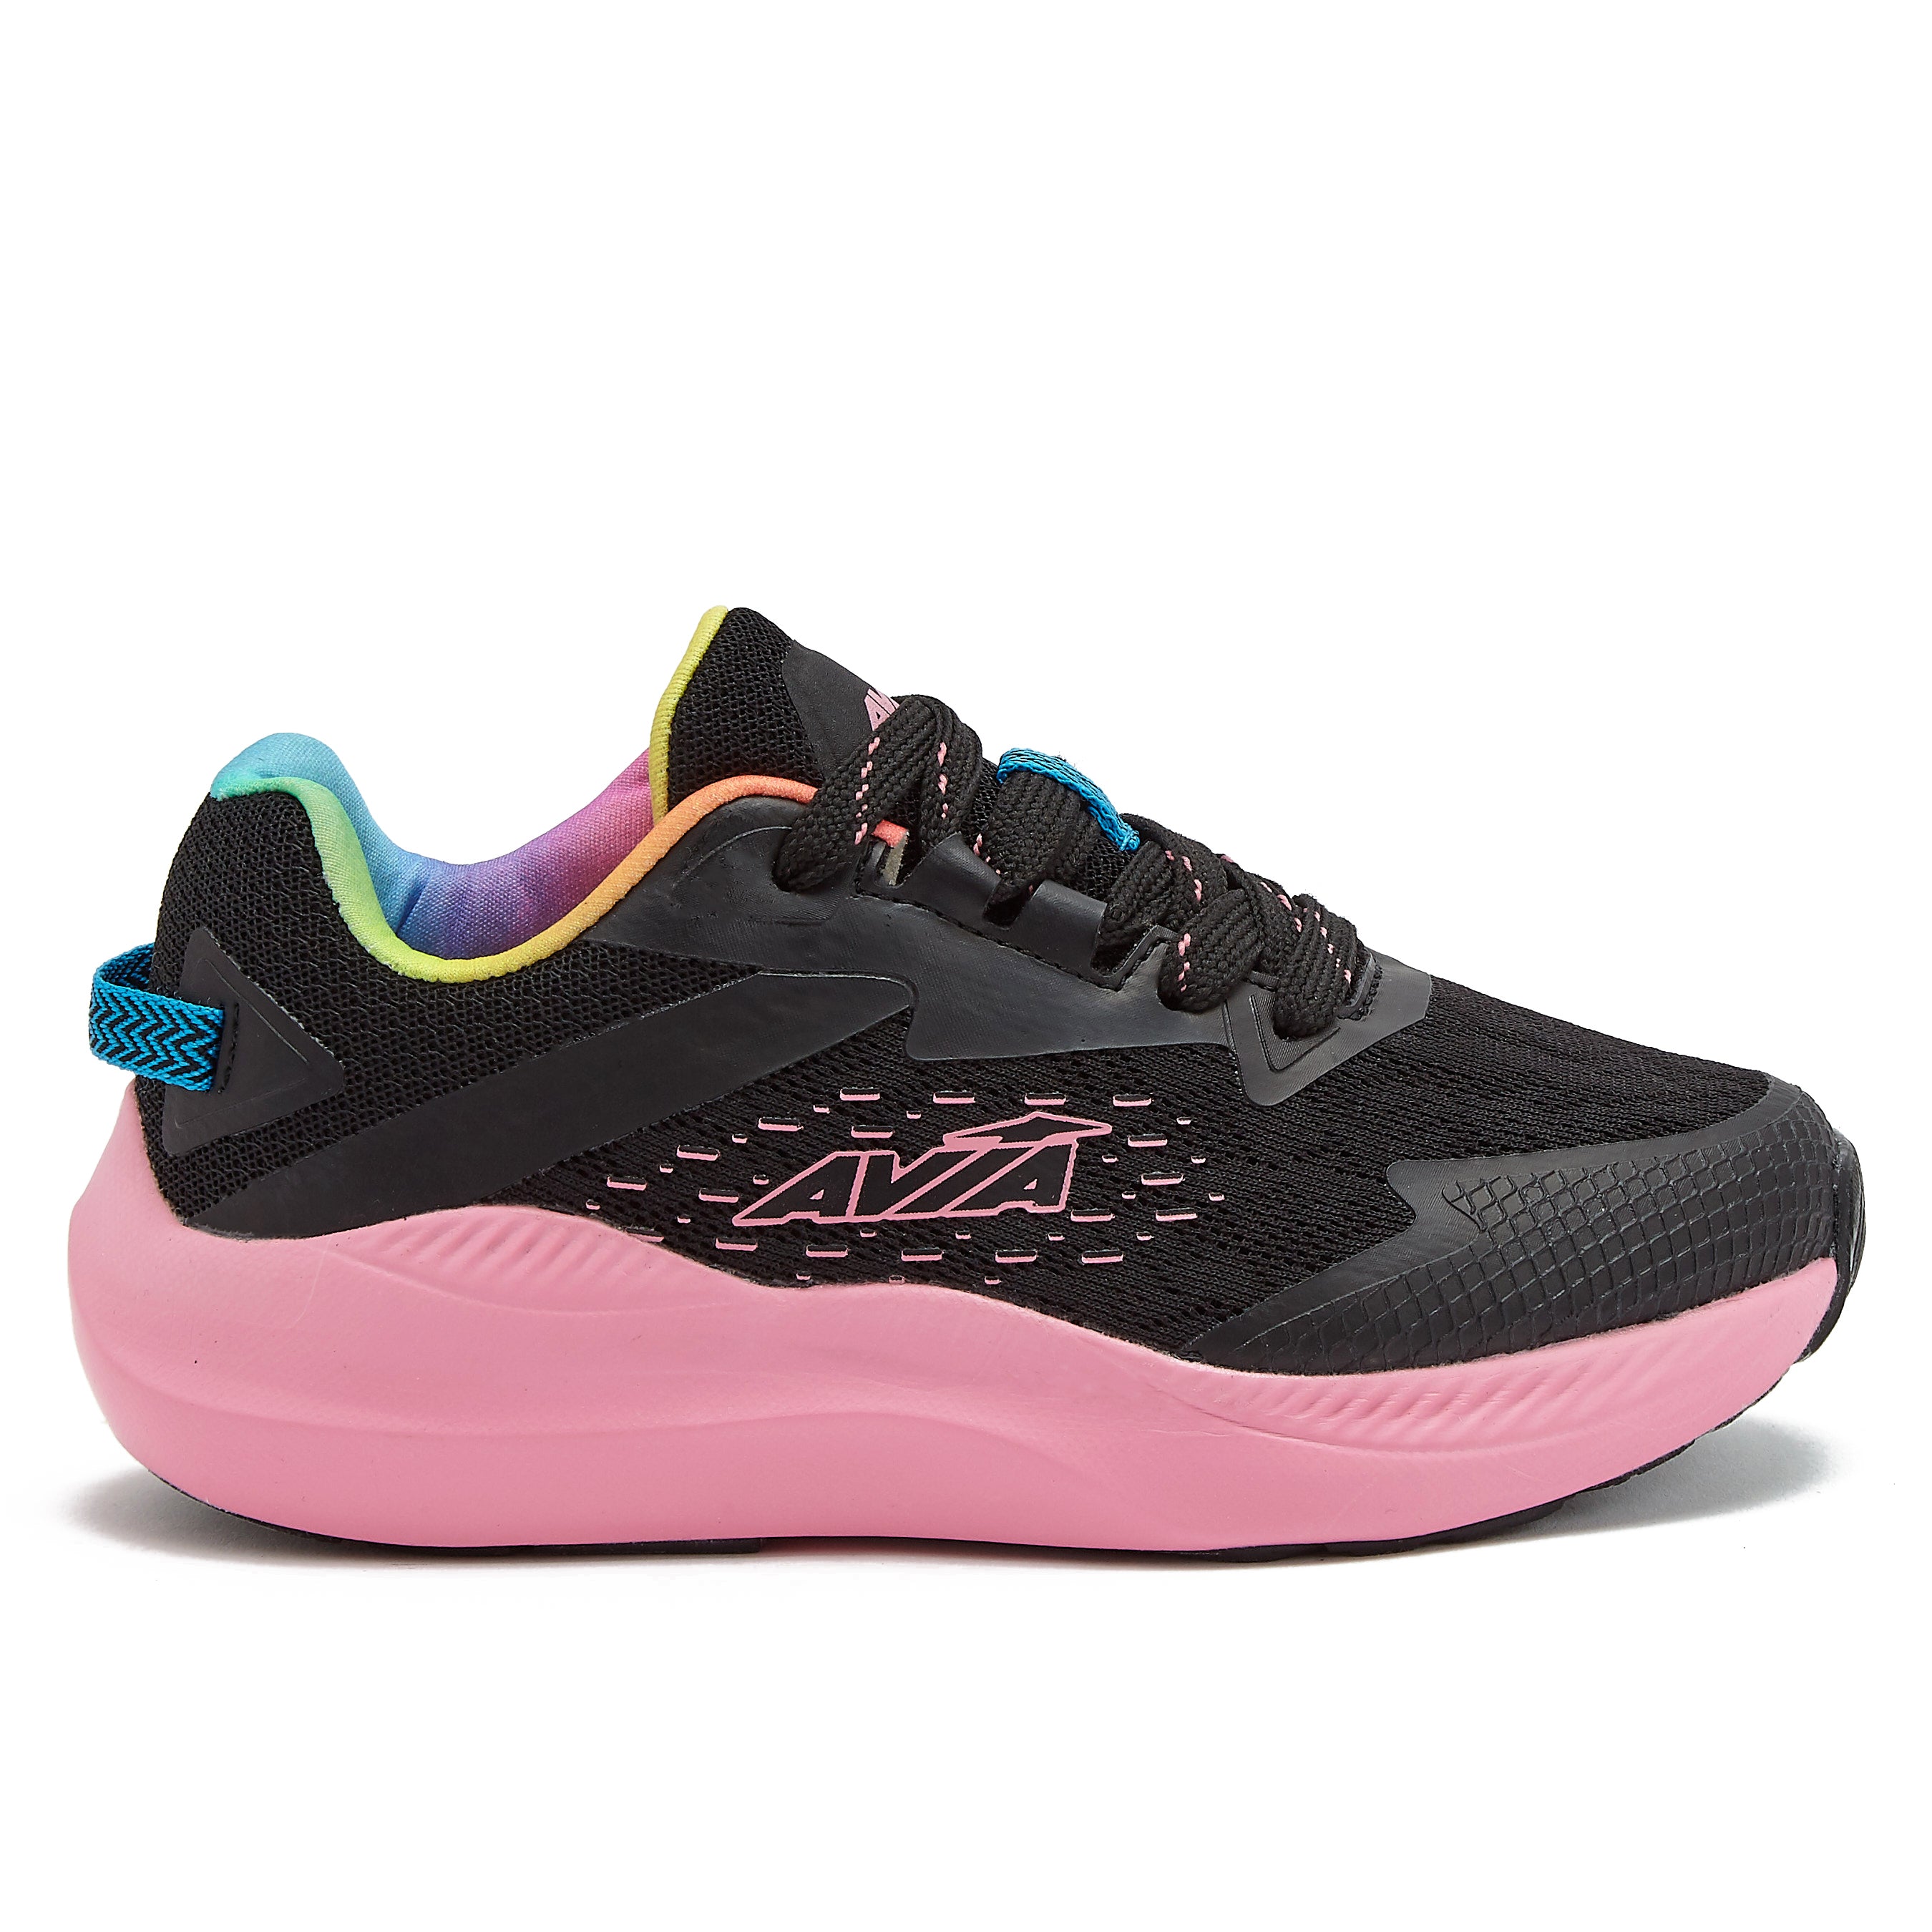 Avia Women's 5000 Performance Sneakers, Wide Width Available